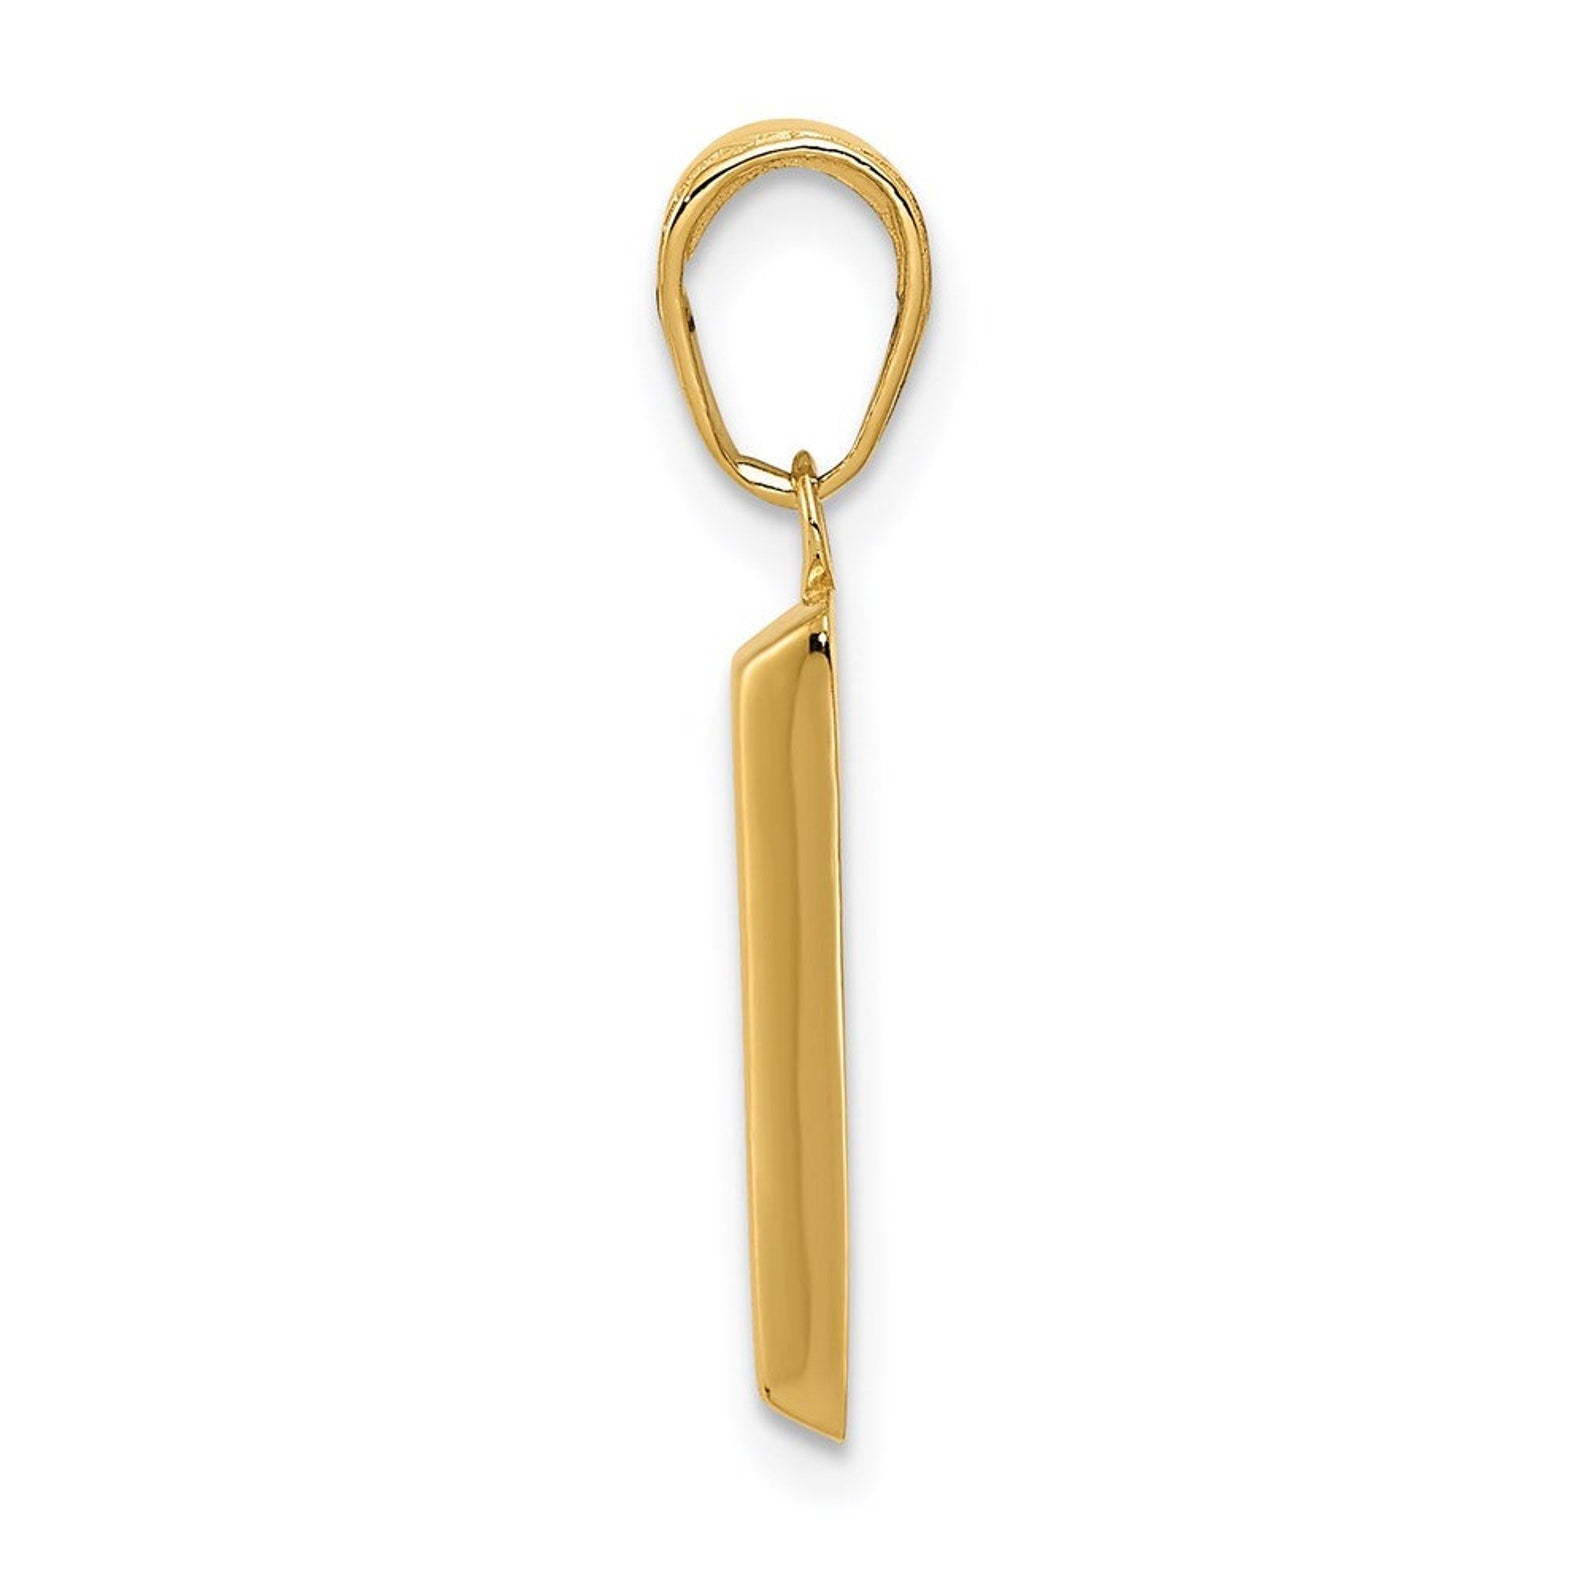 3D Gold Bar Pendant - Charlie & Co. Jewelry